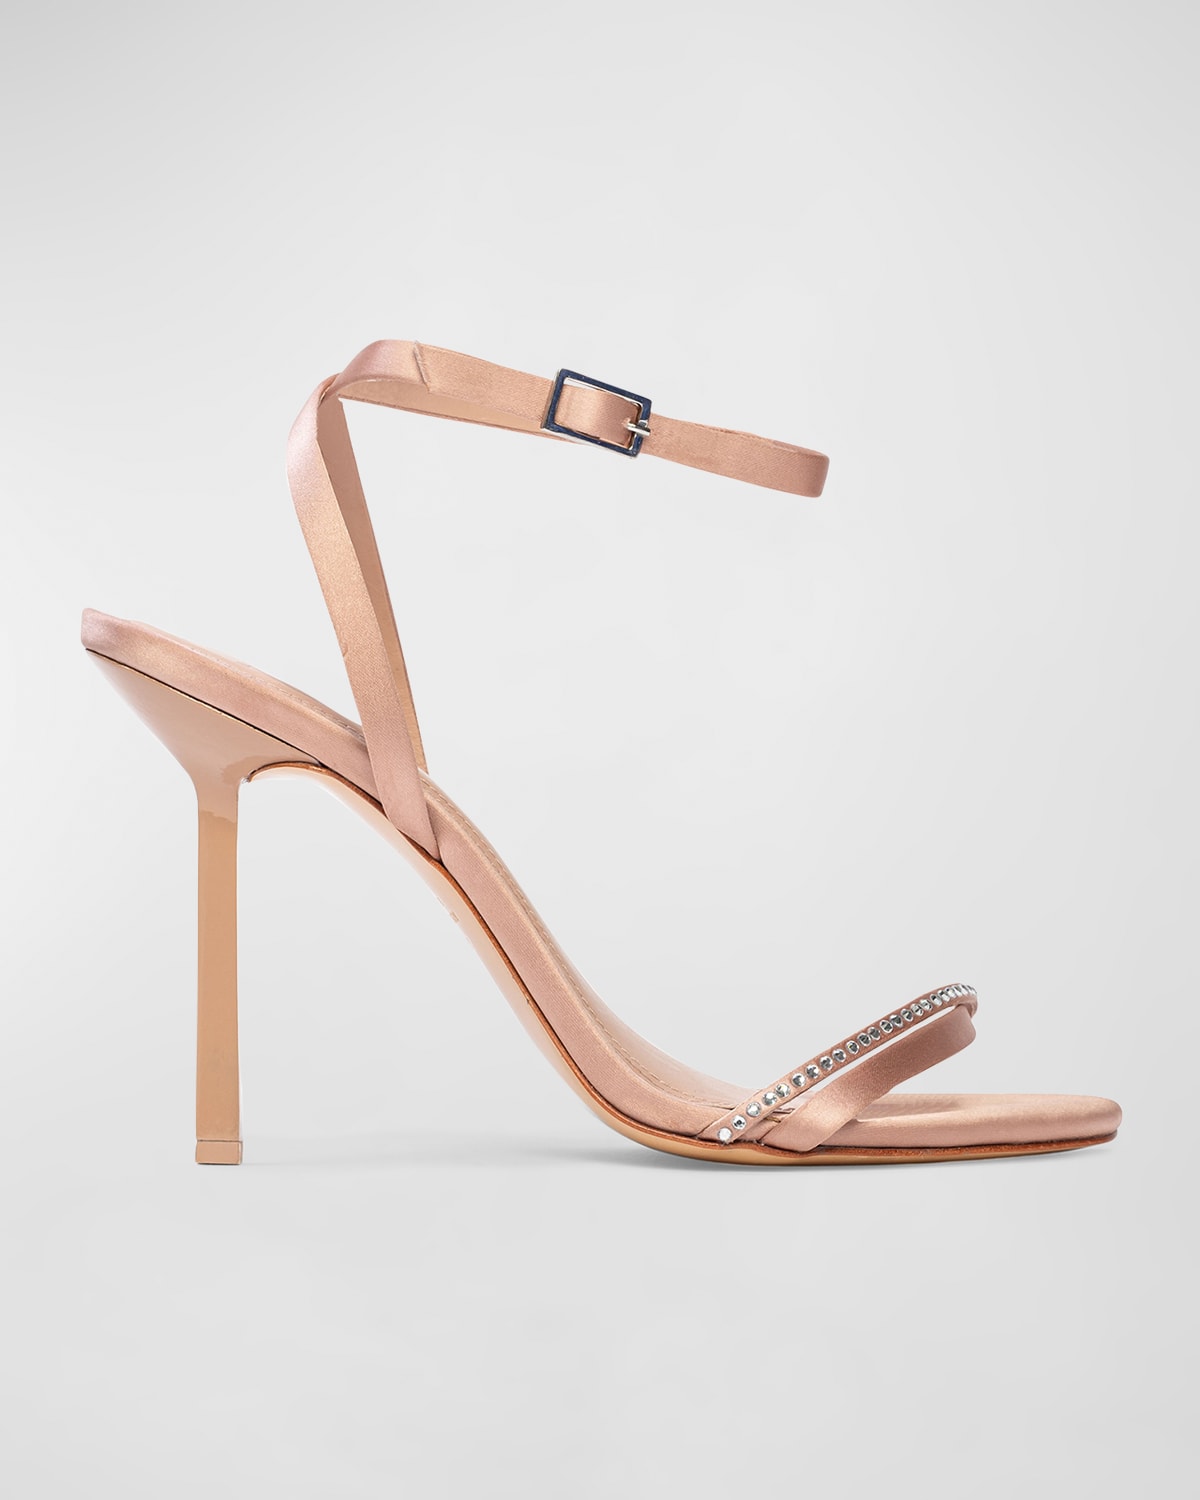 Rumi Satin Crystal Ankle-Strap Sandals